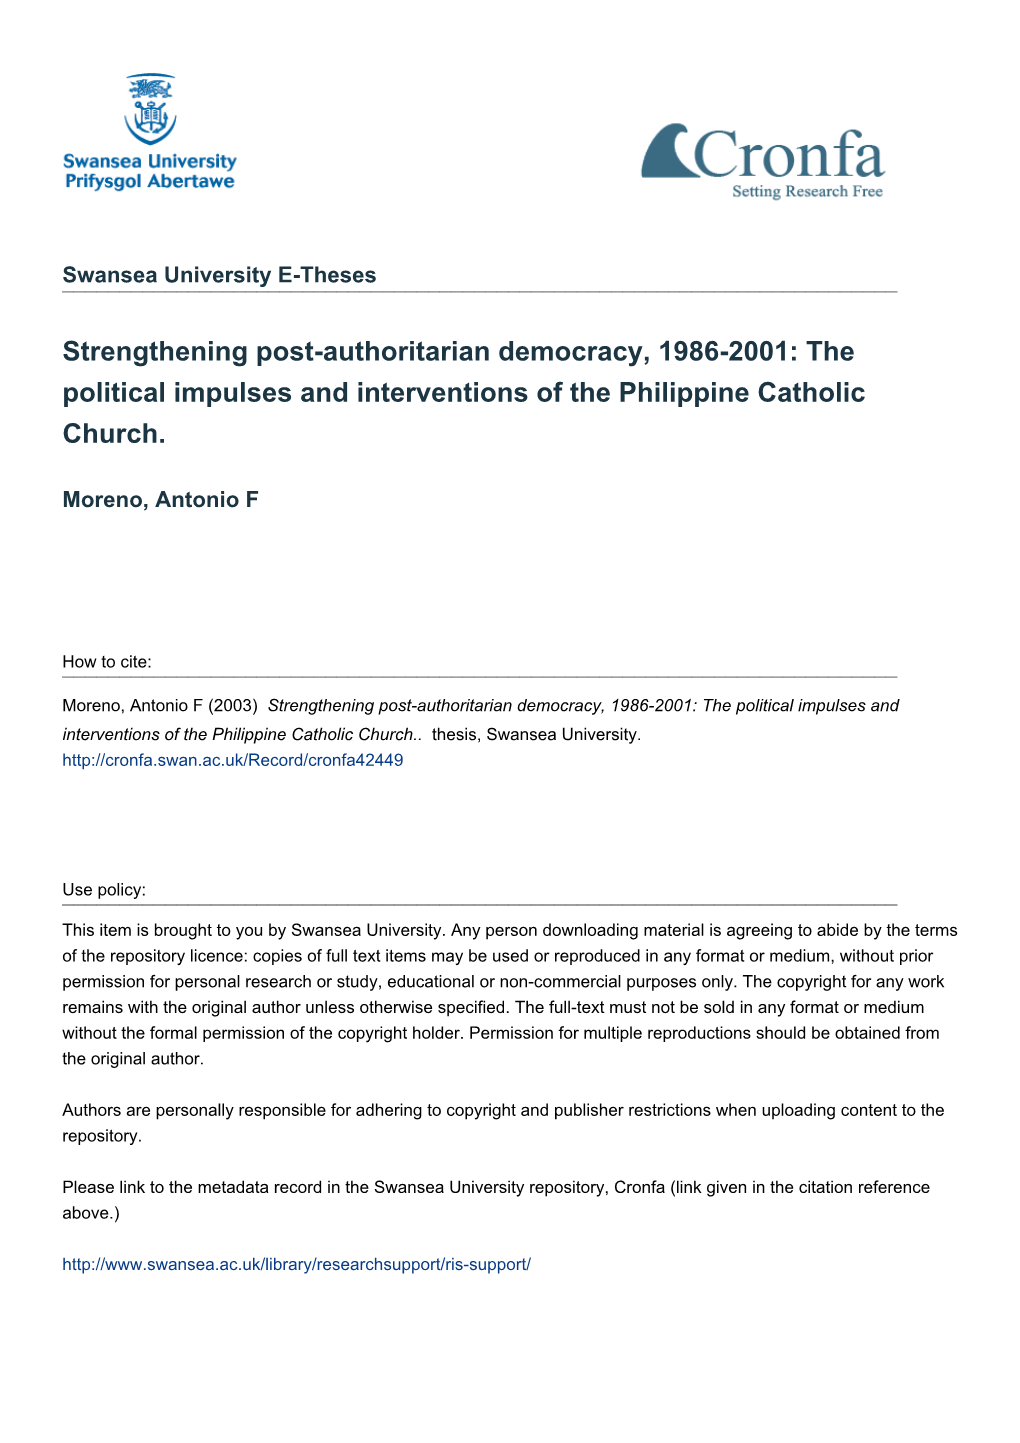 The Political Impulses and Interventions of the Philippine Catholic Church